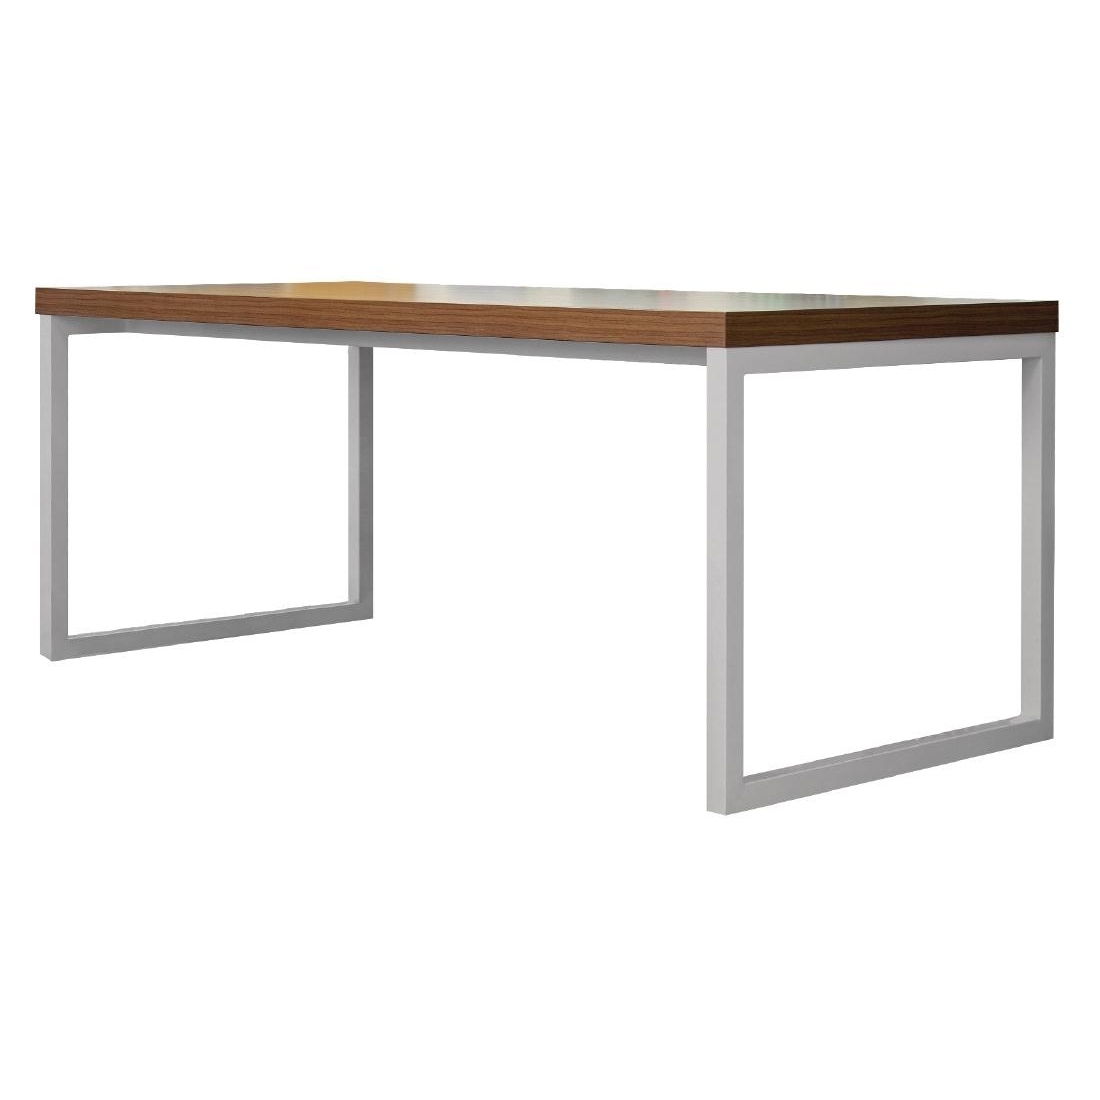 Bolero Dining Table Walnut Effect with Silver Frame 4ft